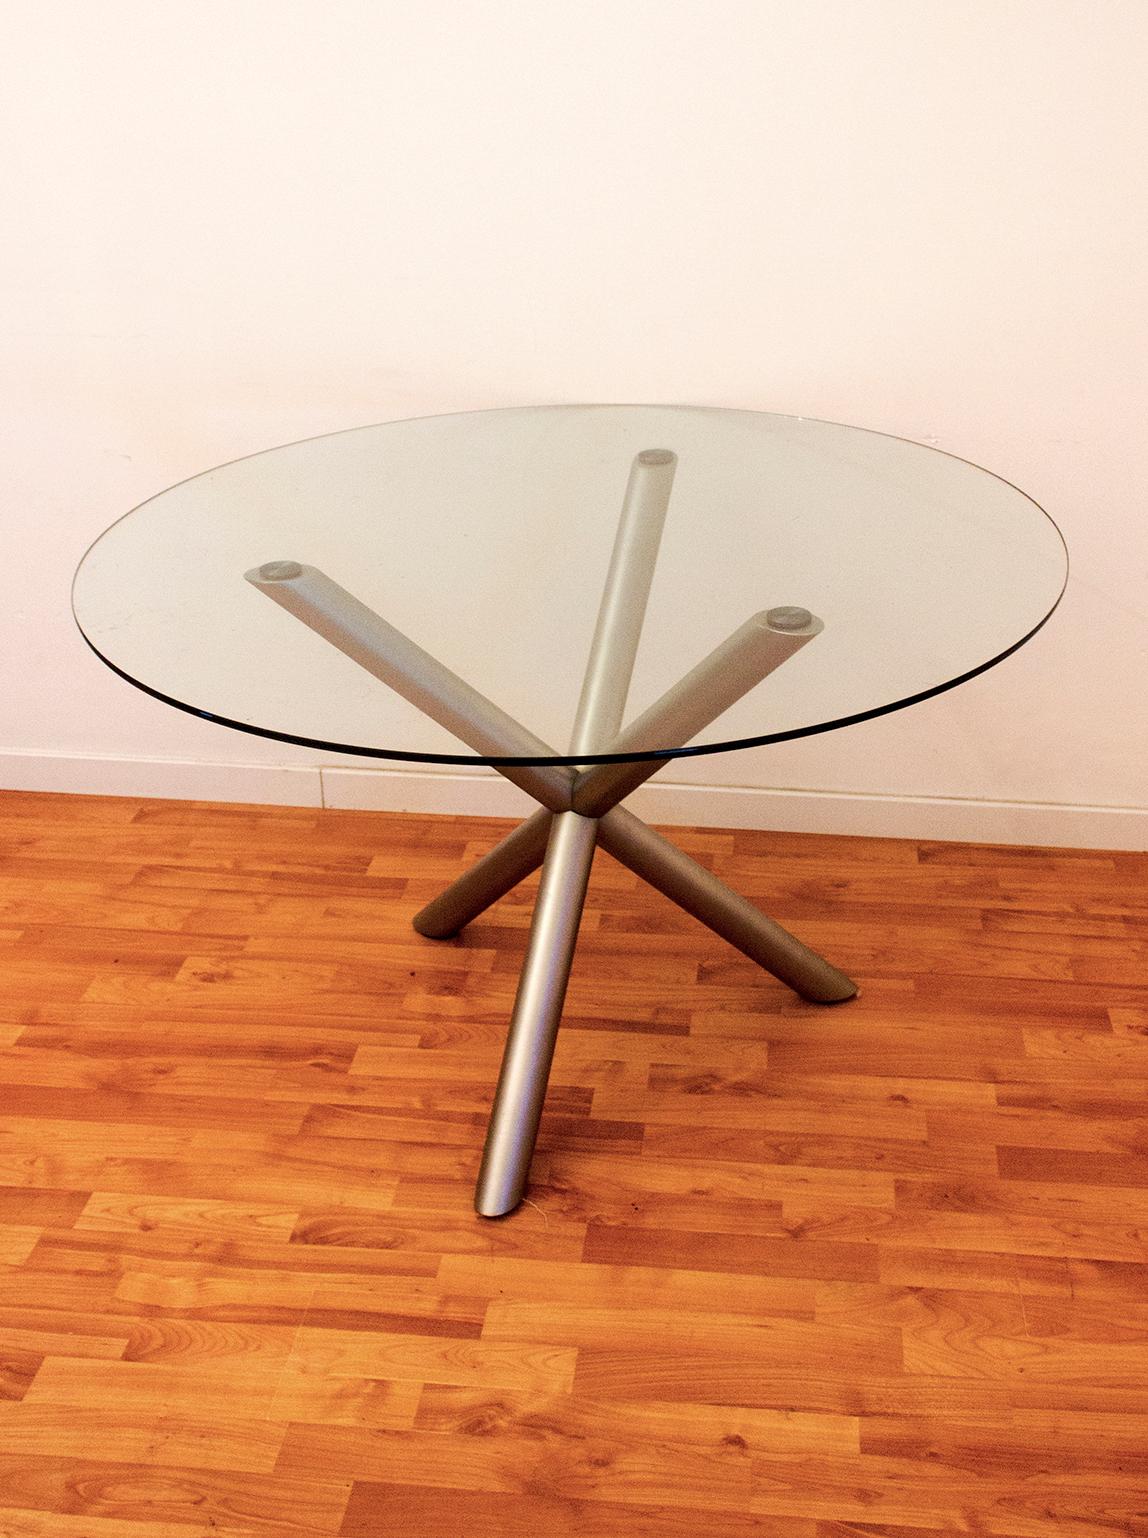 Introducing our round smoked glass dining table with a chrome tripod base, designed by Renato Zevi and manufactured by Roche Bobois in France during the Mid-Century period of design, from 1970 to 1979.

This dining table features a timeless and